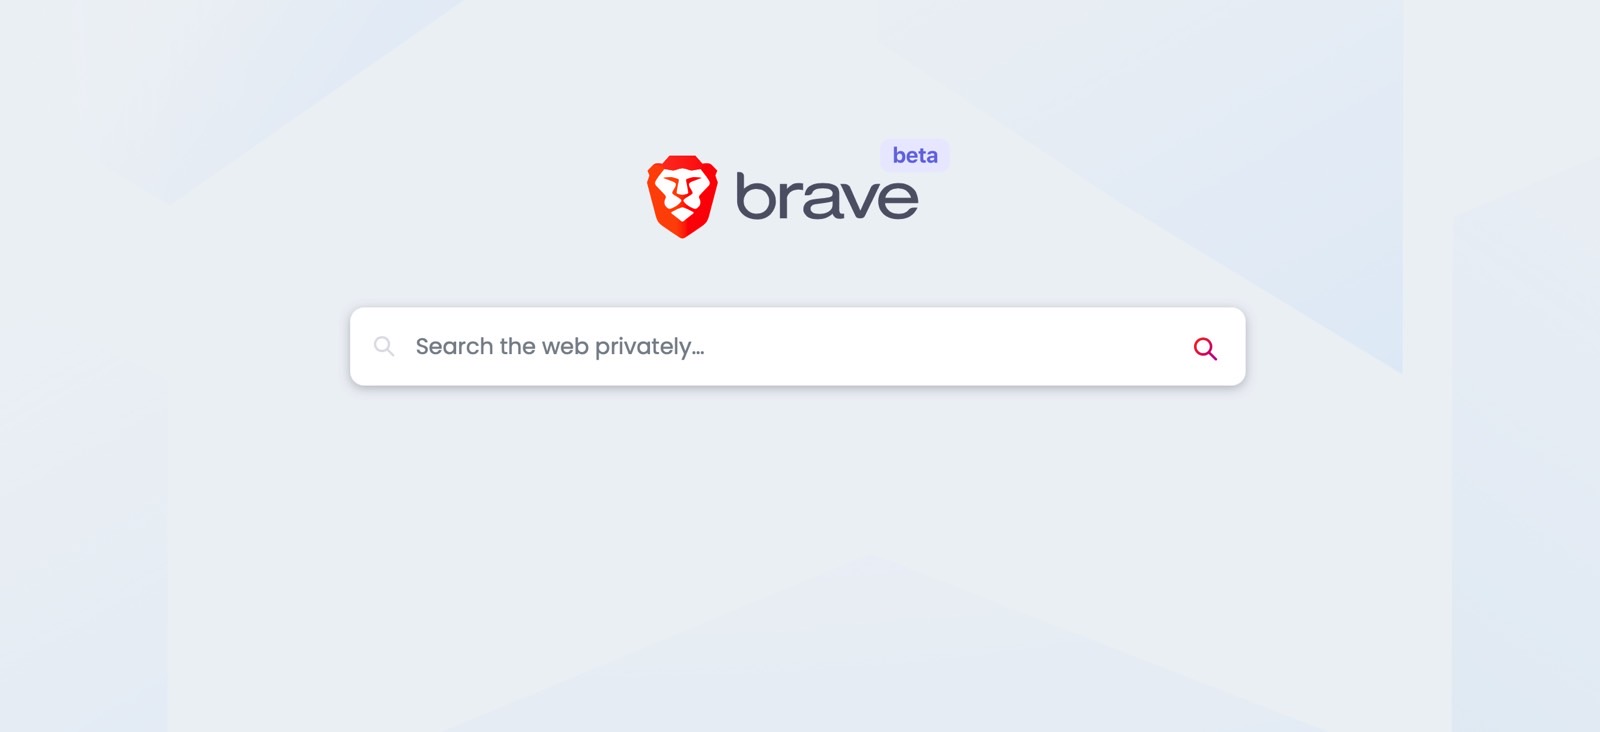 best search engine for brave